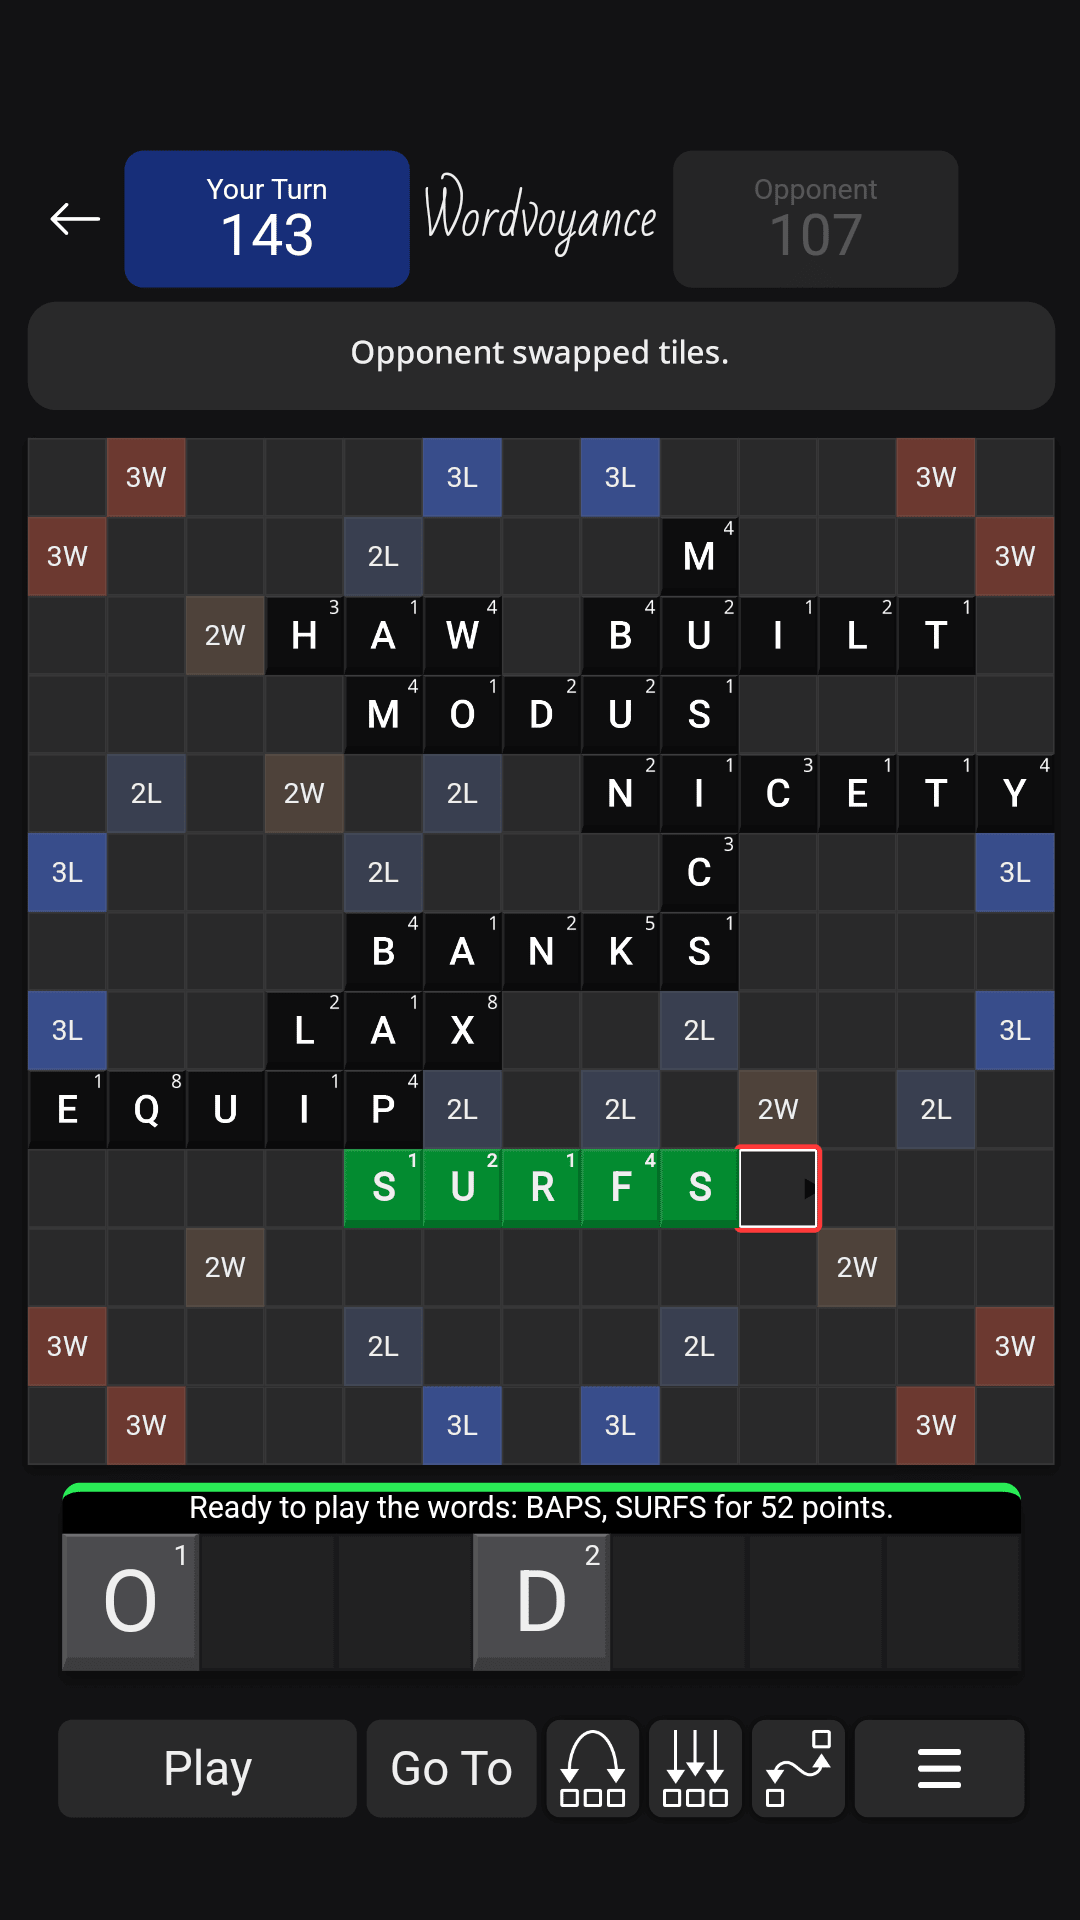 A screenshot of Wordvoyance, in its Dark theme, where the player has used rack tiles to spell the word SURFS for 52 points, forming a crossword by making the word BAP into a present-tense verb.